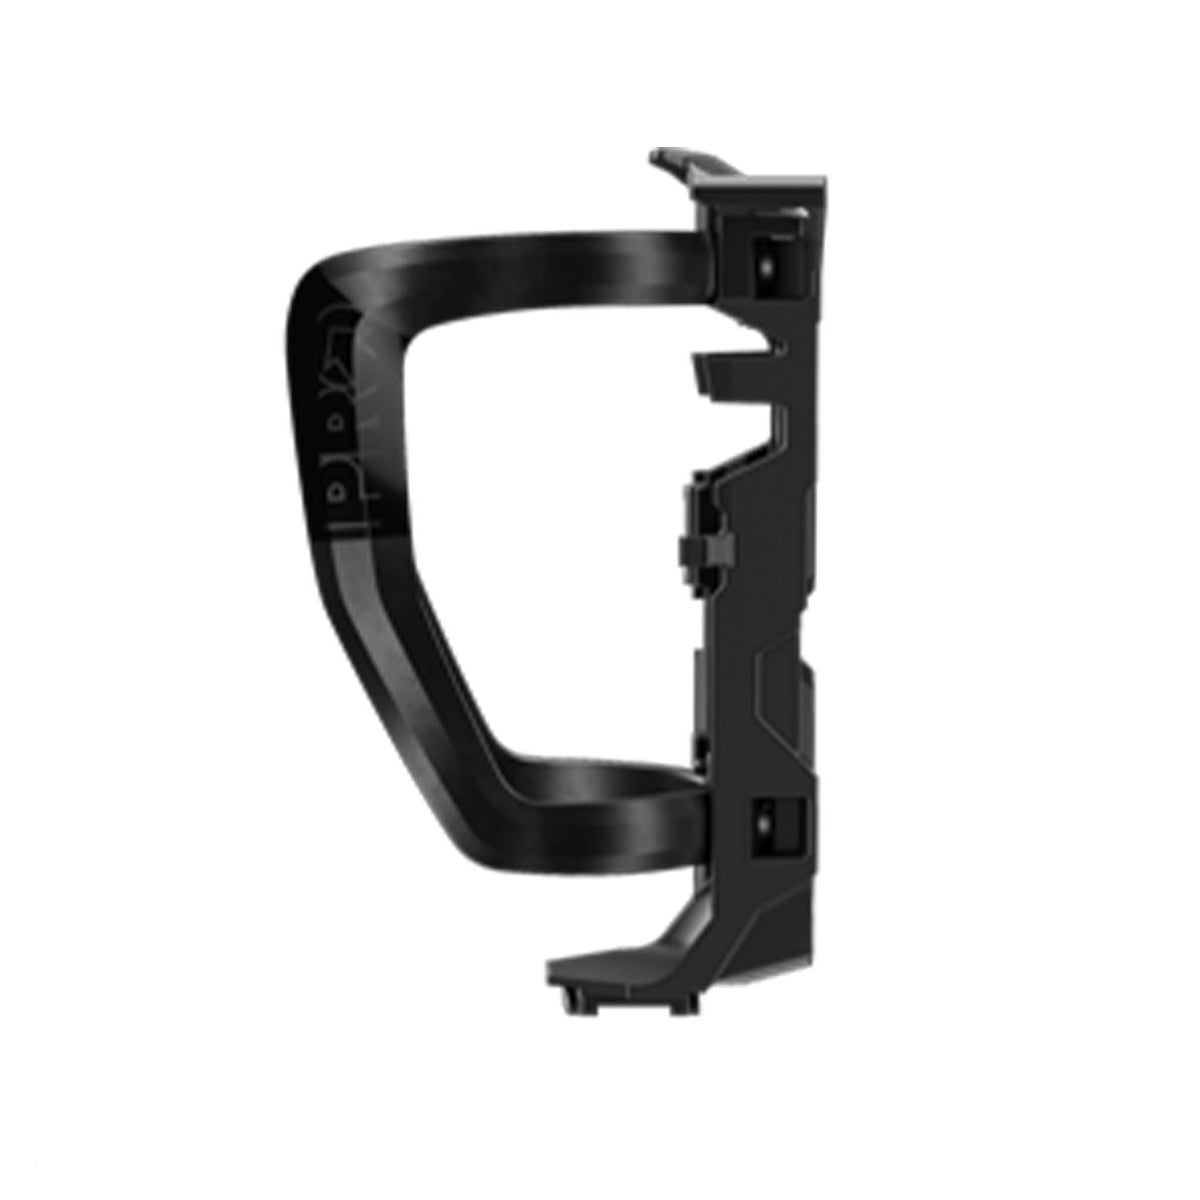 Shimano Pro Bottle Cage Smart cage/ w Tire Levers